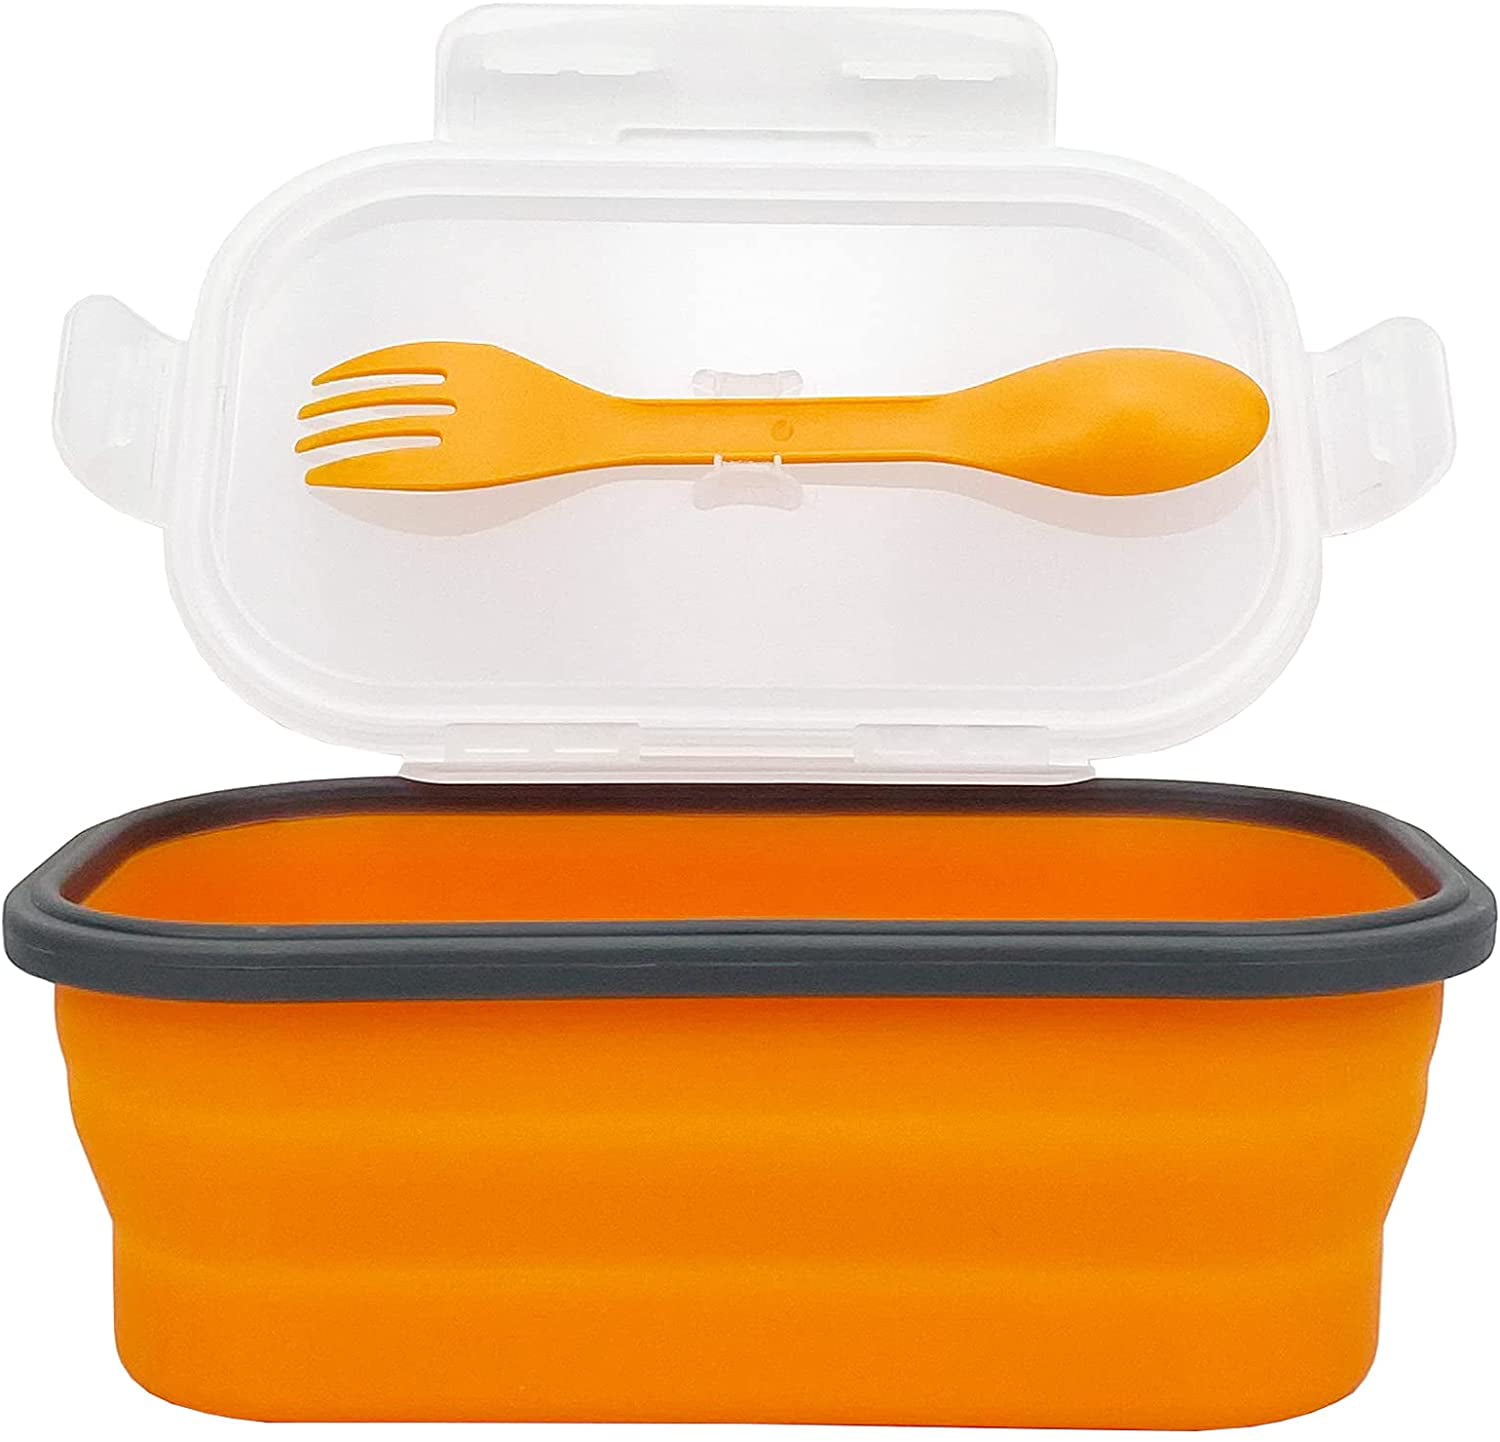 Folding Portable Silicone Lunch Bento Box Microwavable BPA Free Food Container 